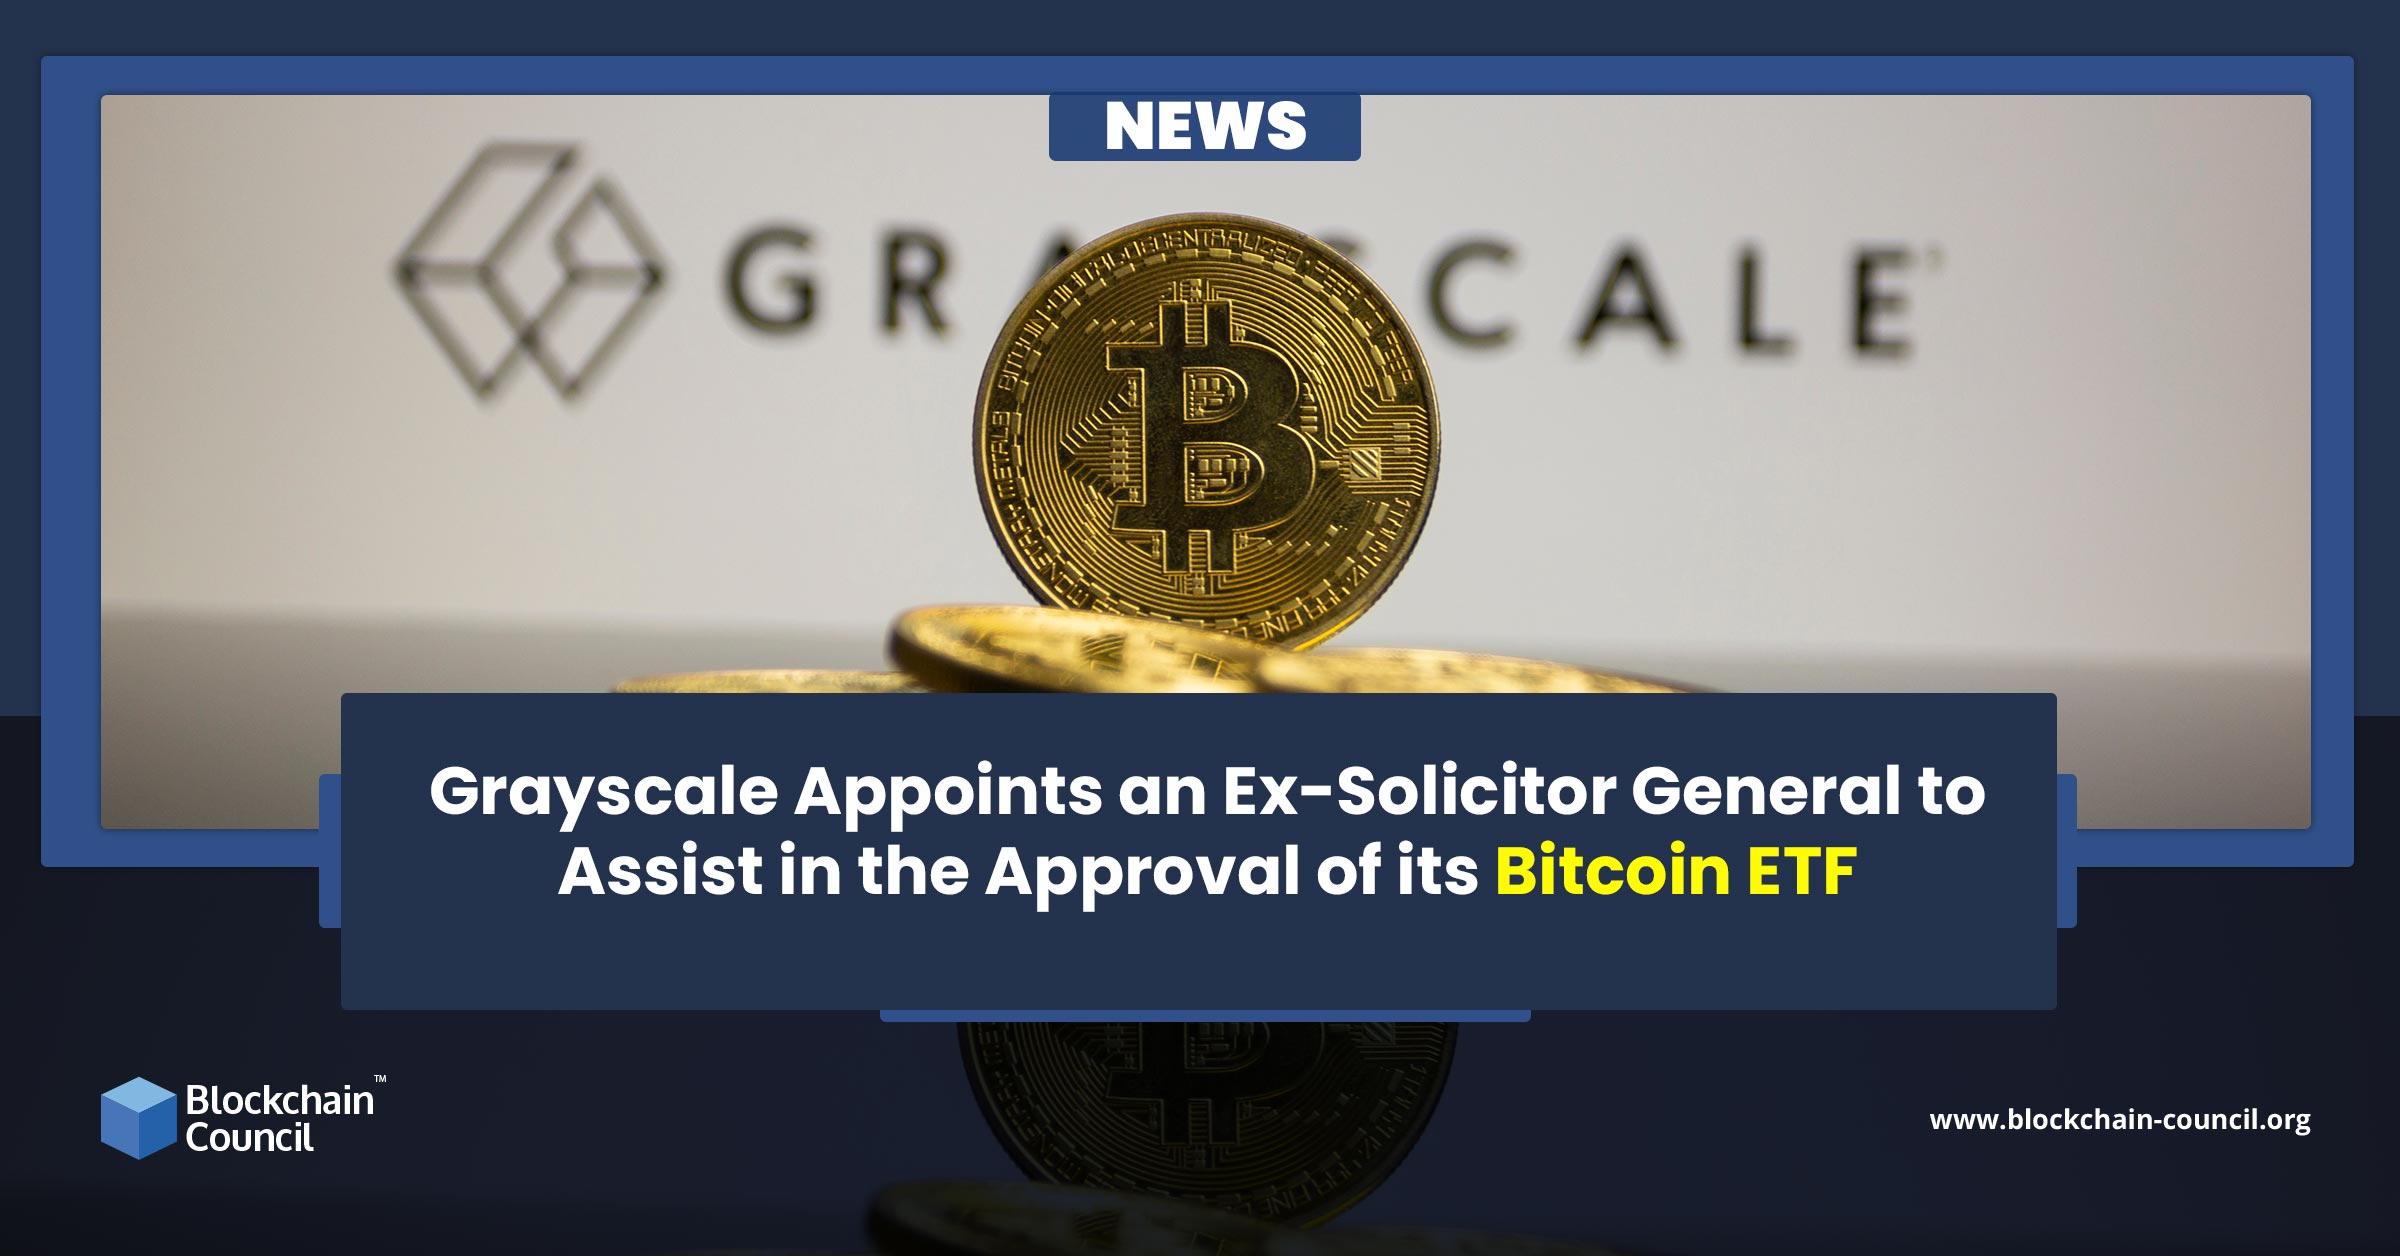 Grayscale Appoints an Ex-Solicitor General to Assist in the Approval of its Bitcoin ETF